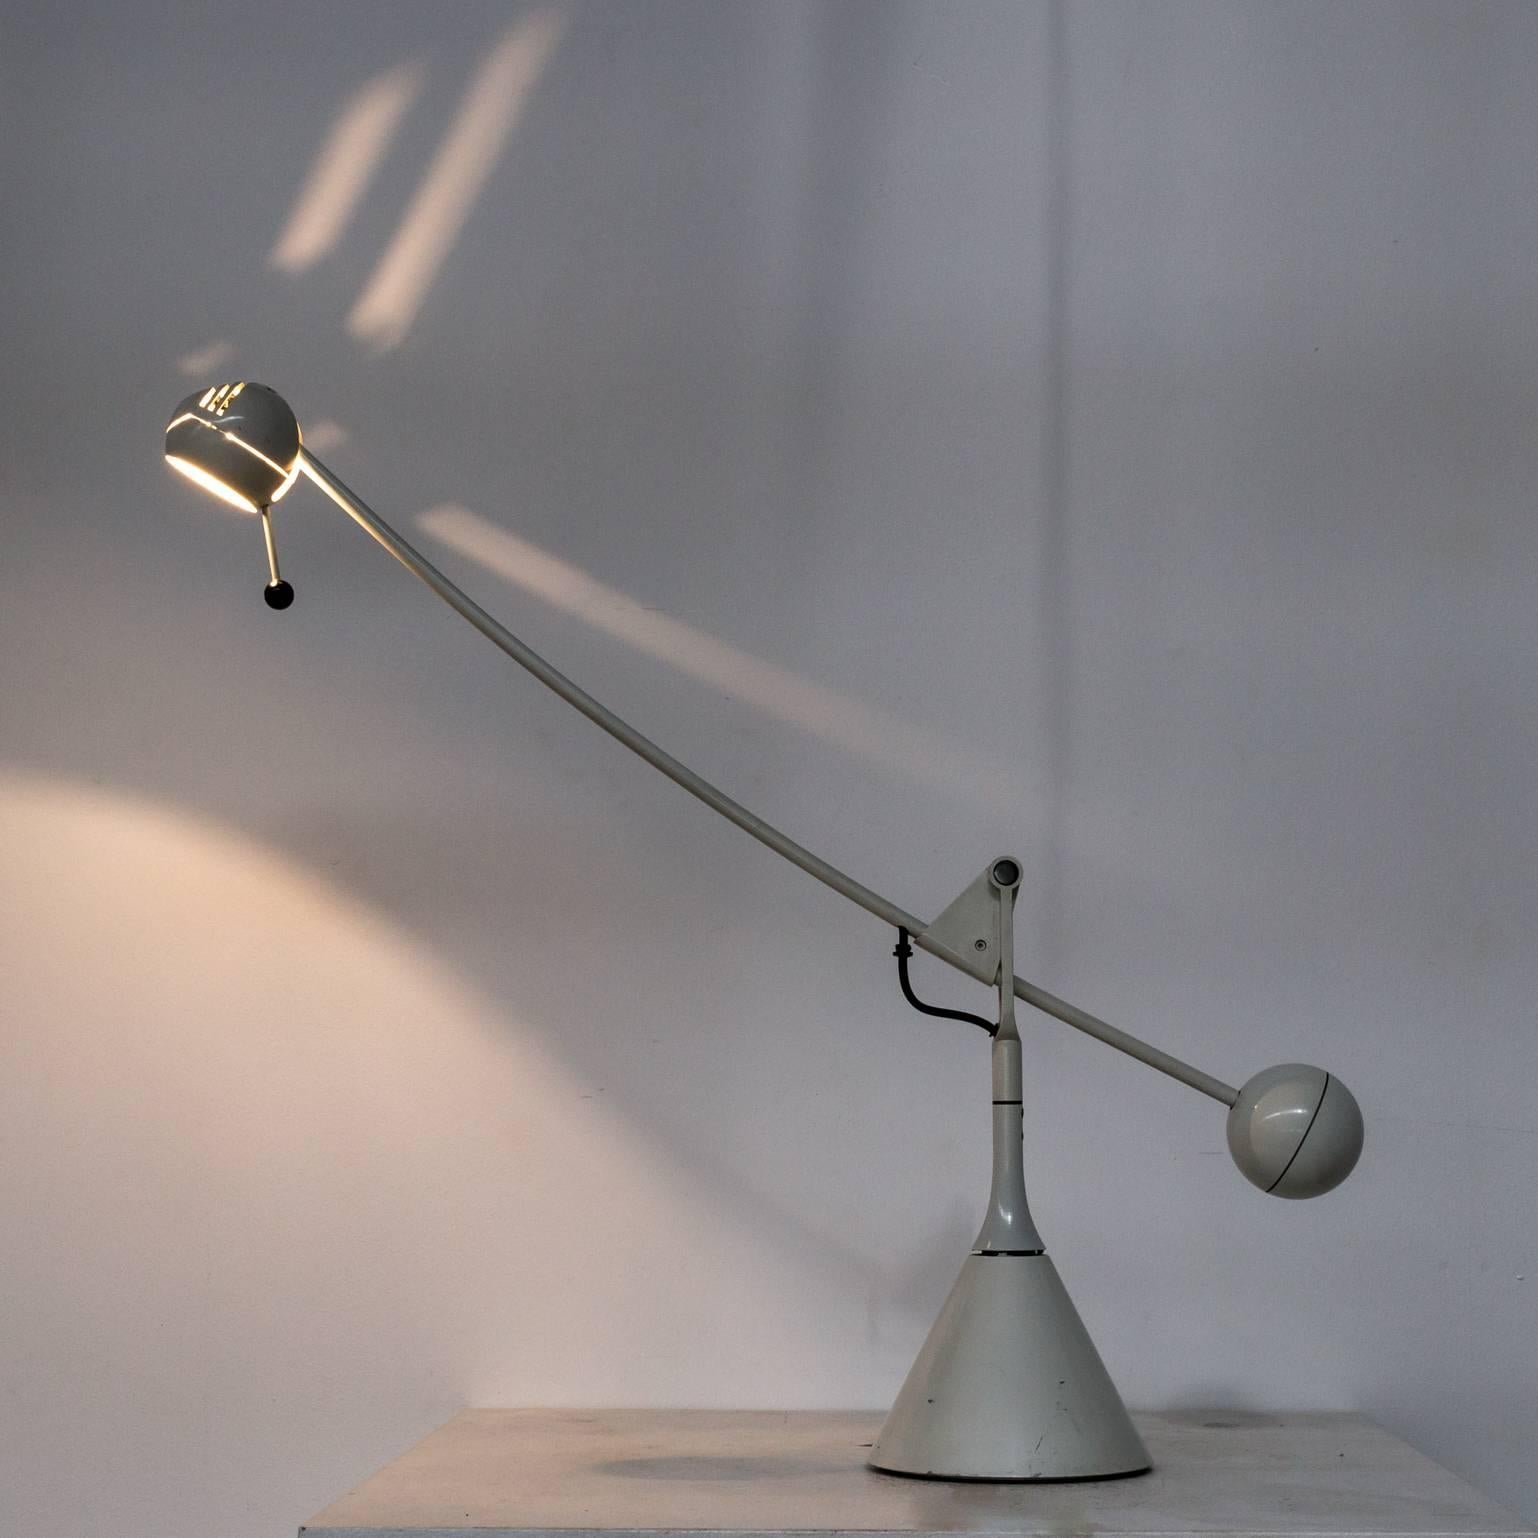 1980s Enrique French table lamp for Metalarte Spain. Good and working condition, consistent with age and use.